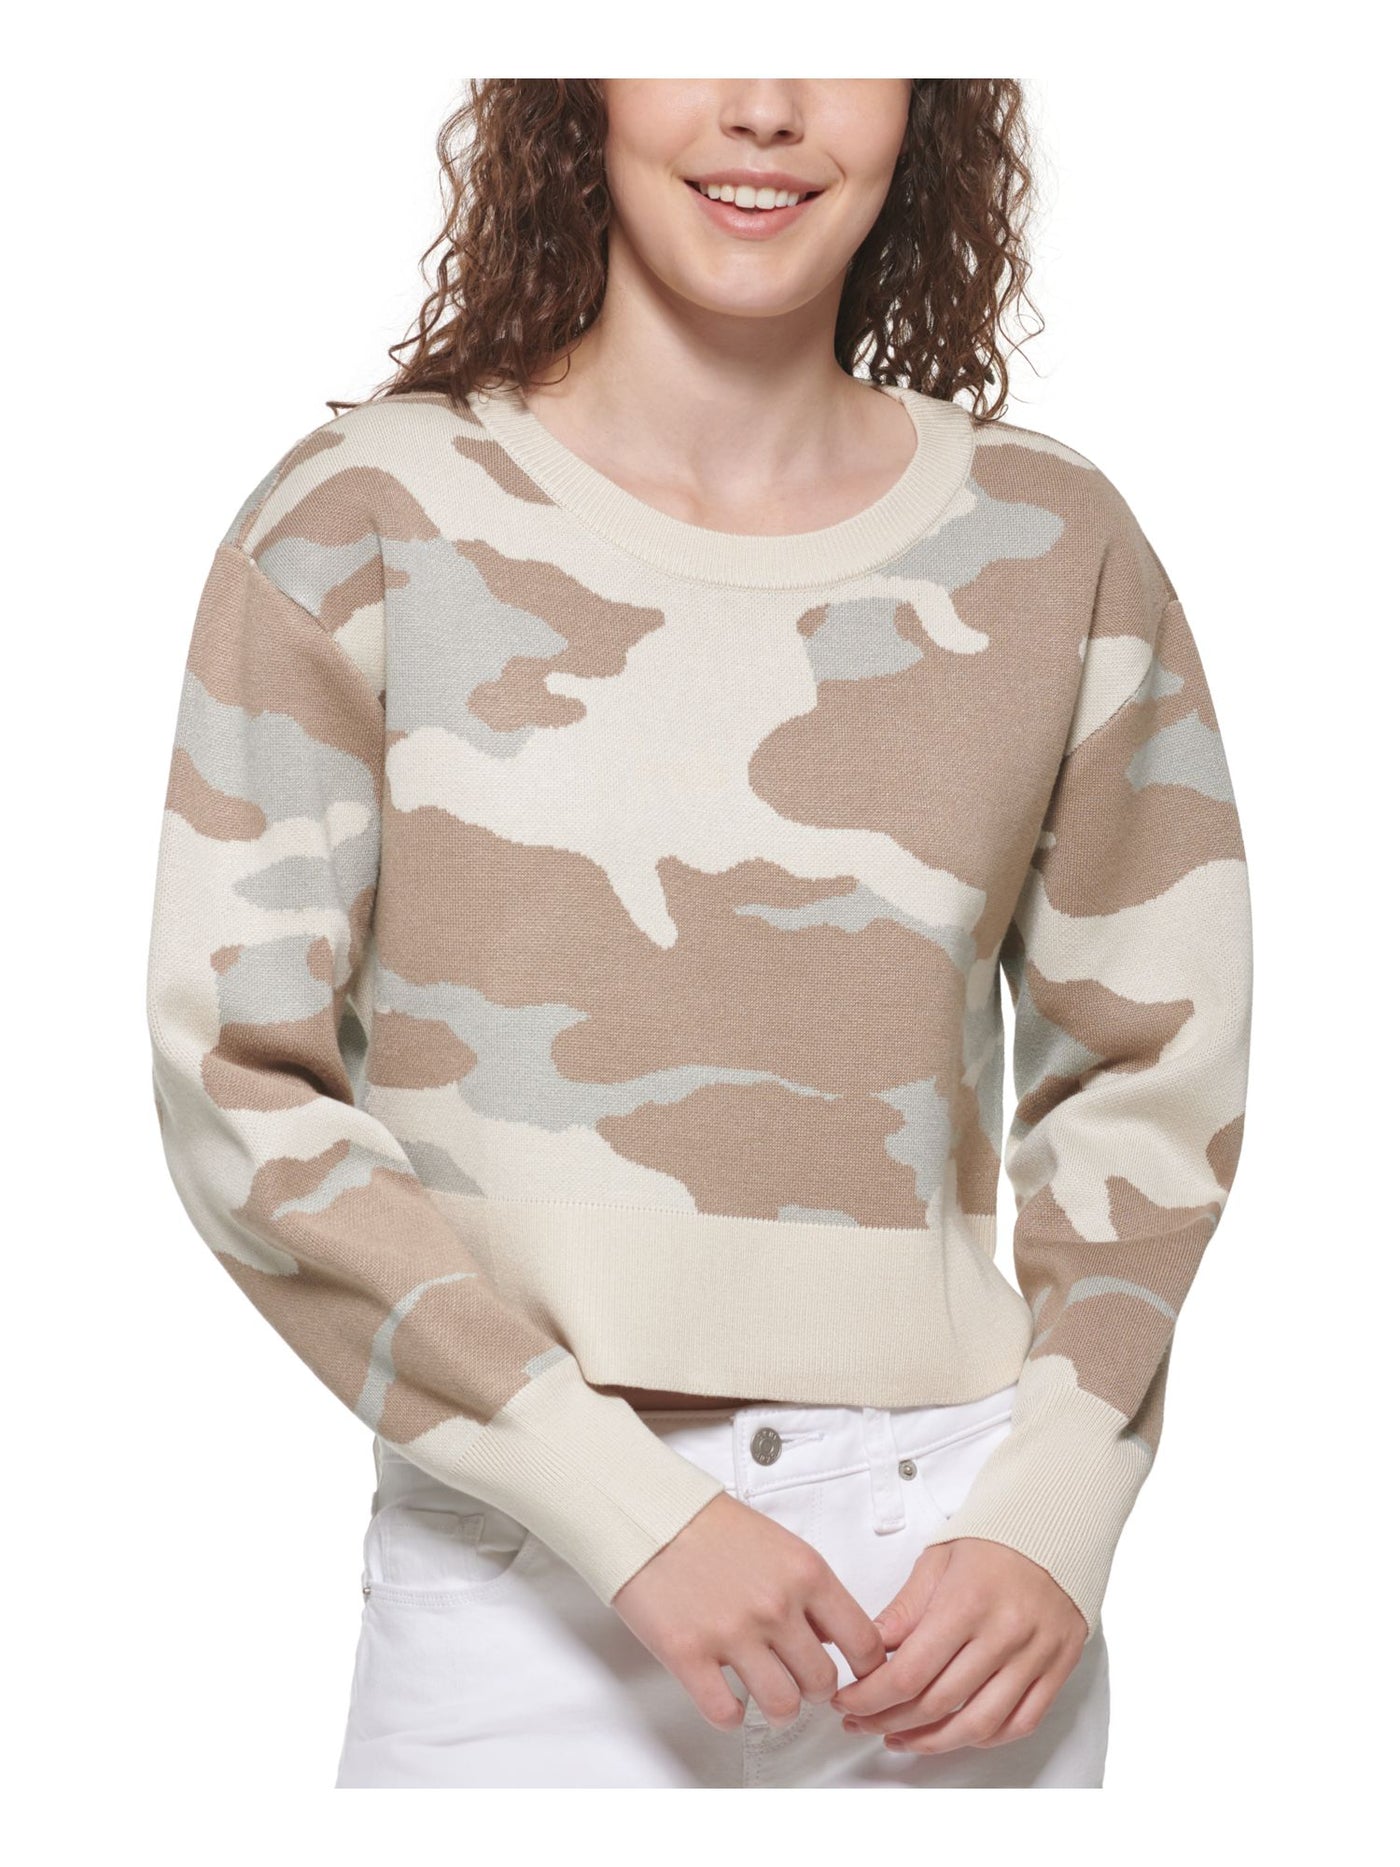 DKNY Womens Brown Camouflage Long Sleeve Crew Neck Sweater L